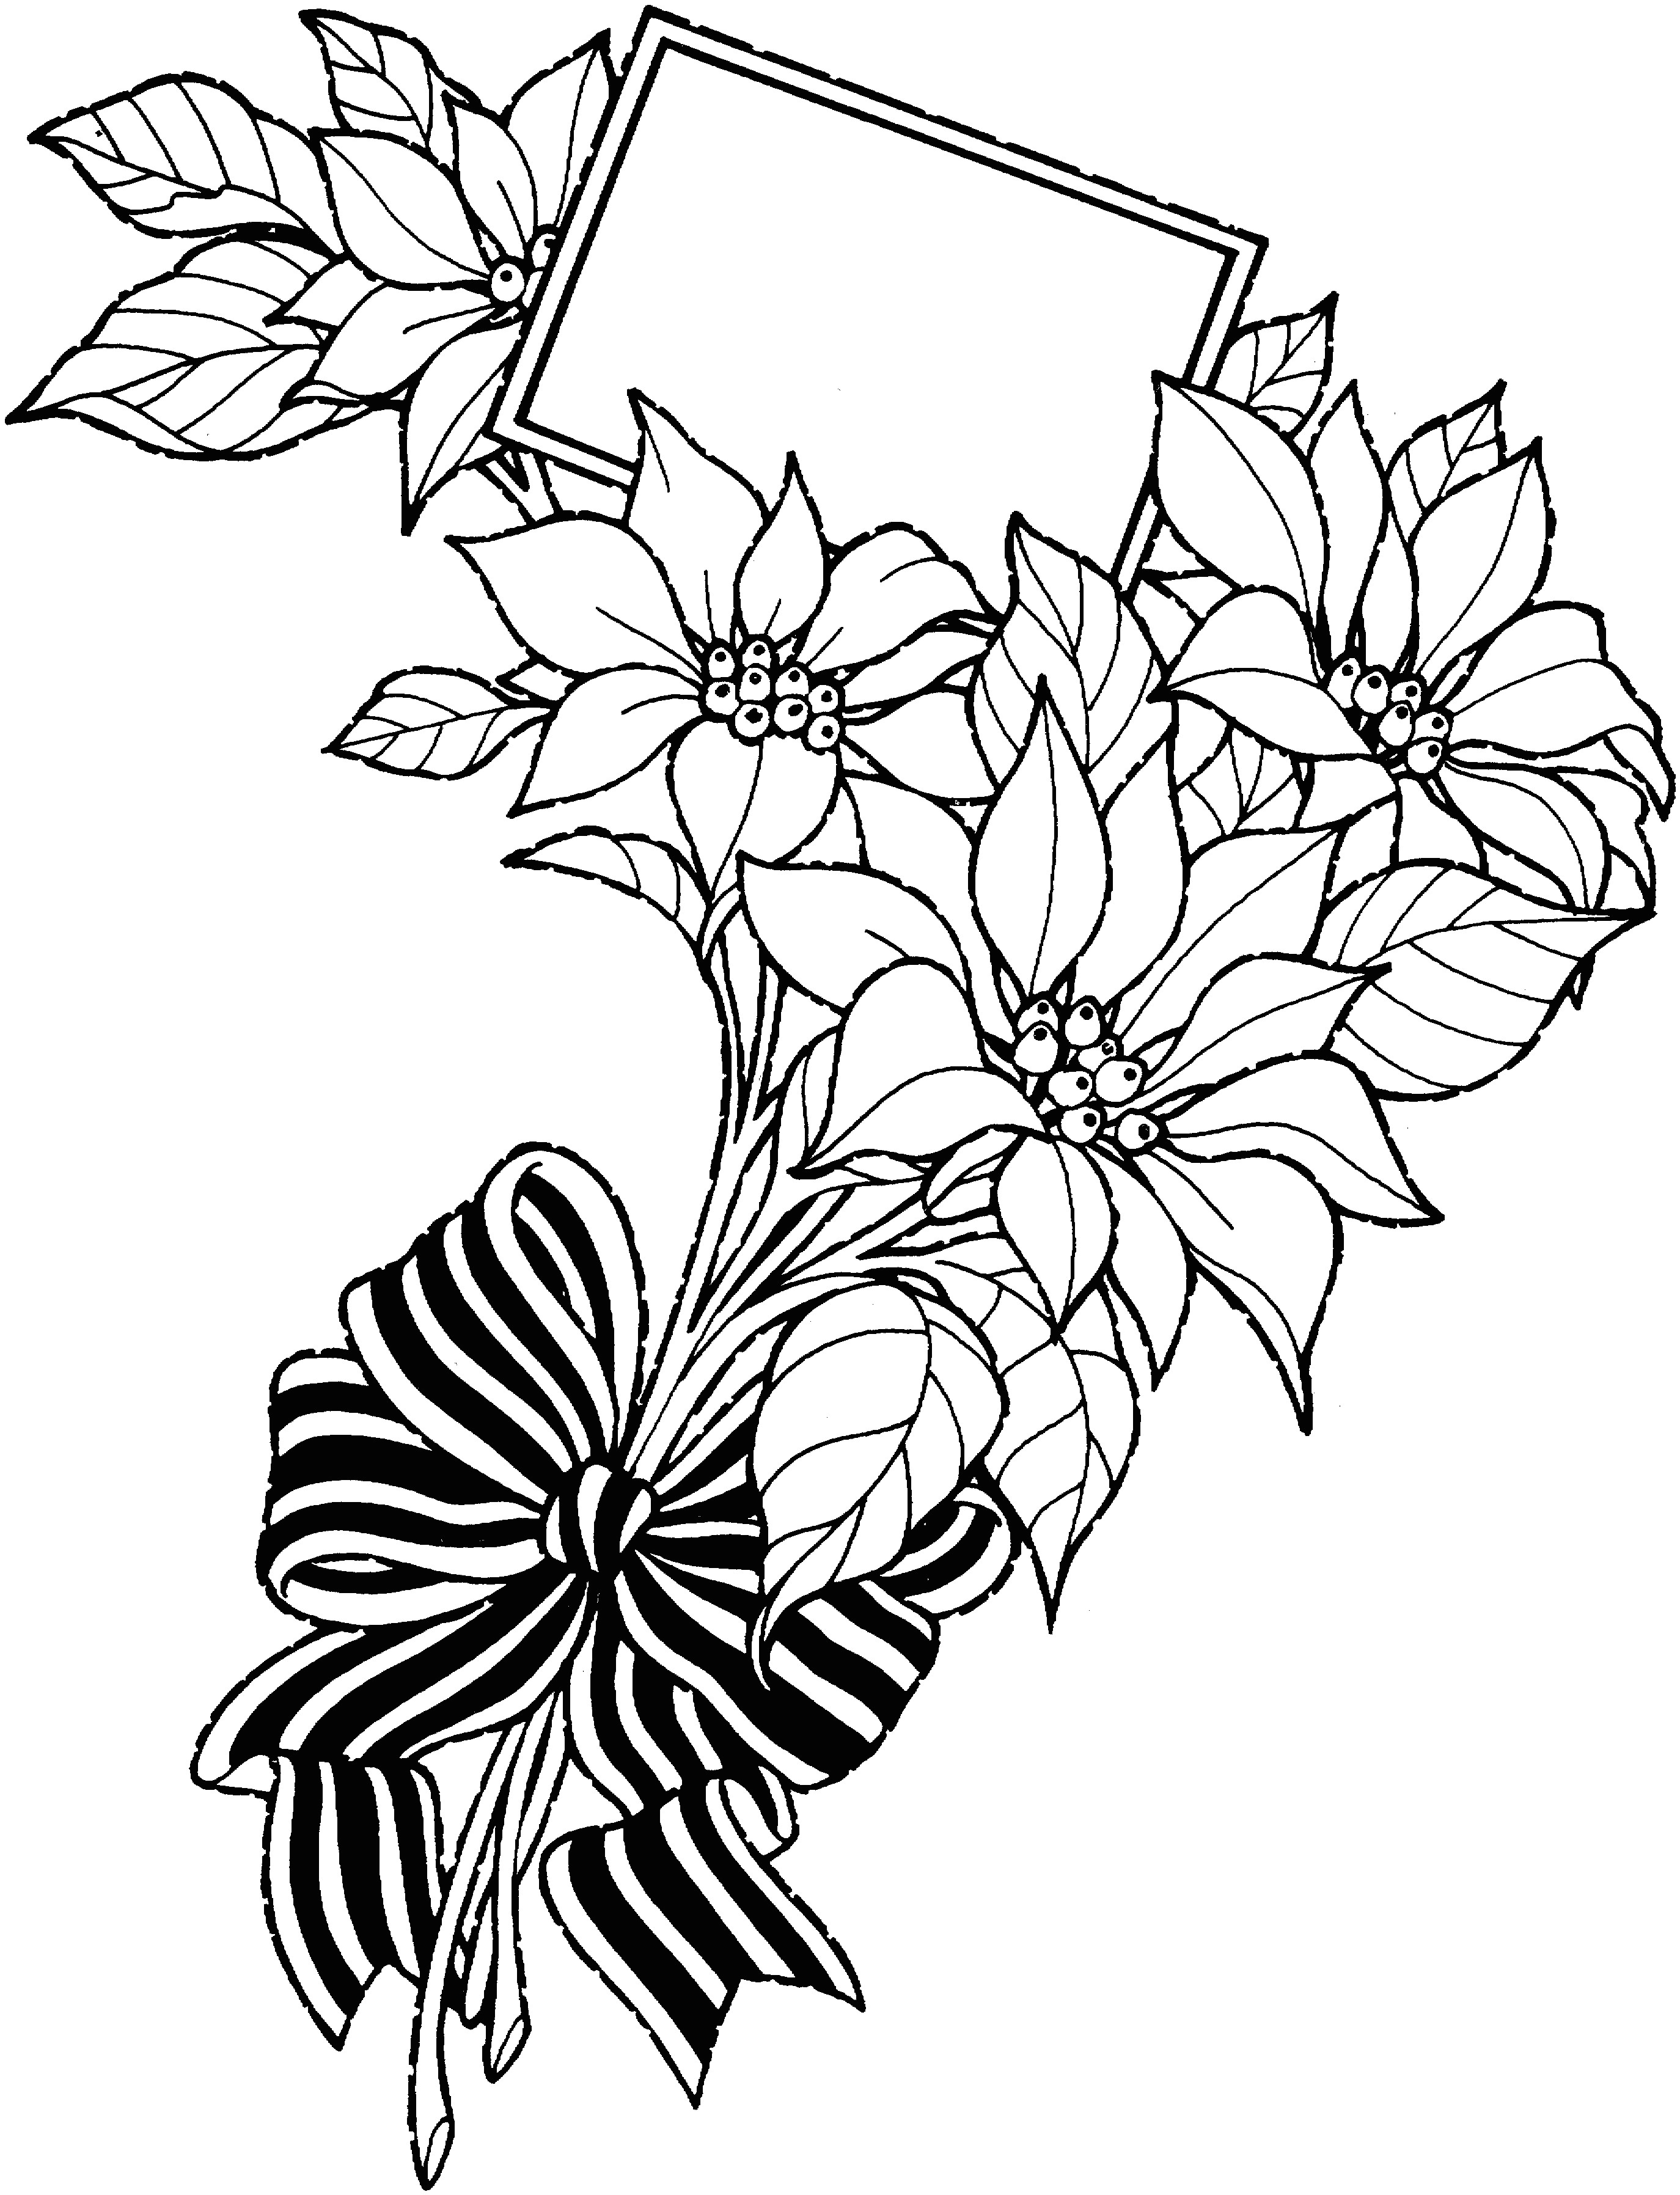 Drawing A White Rose Rose Drawing Fresh 20 Awesome White Rose Flowers Black Ezba